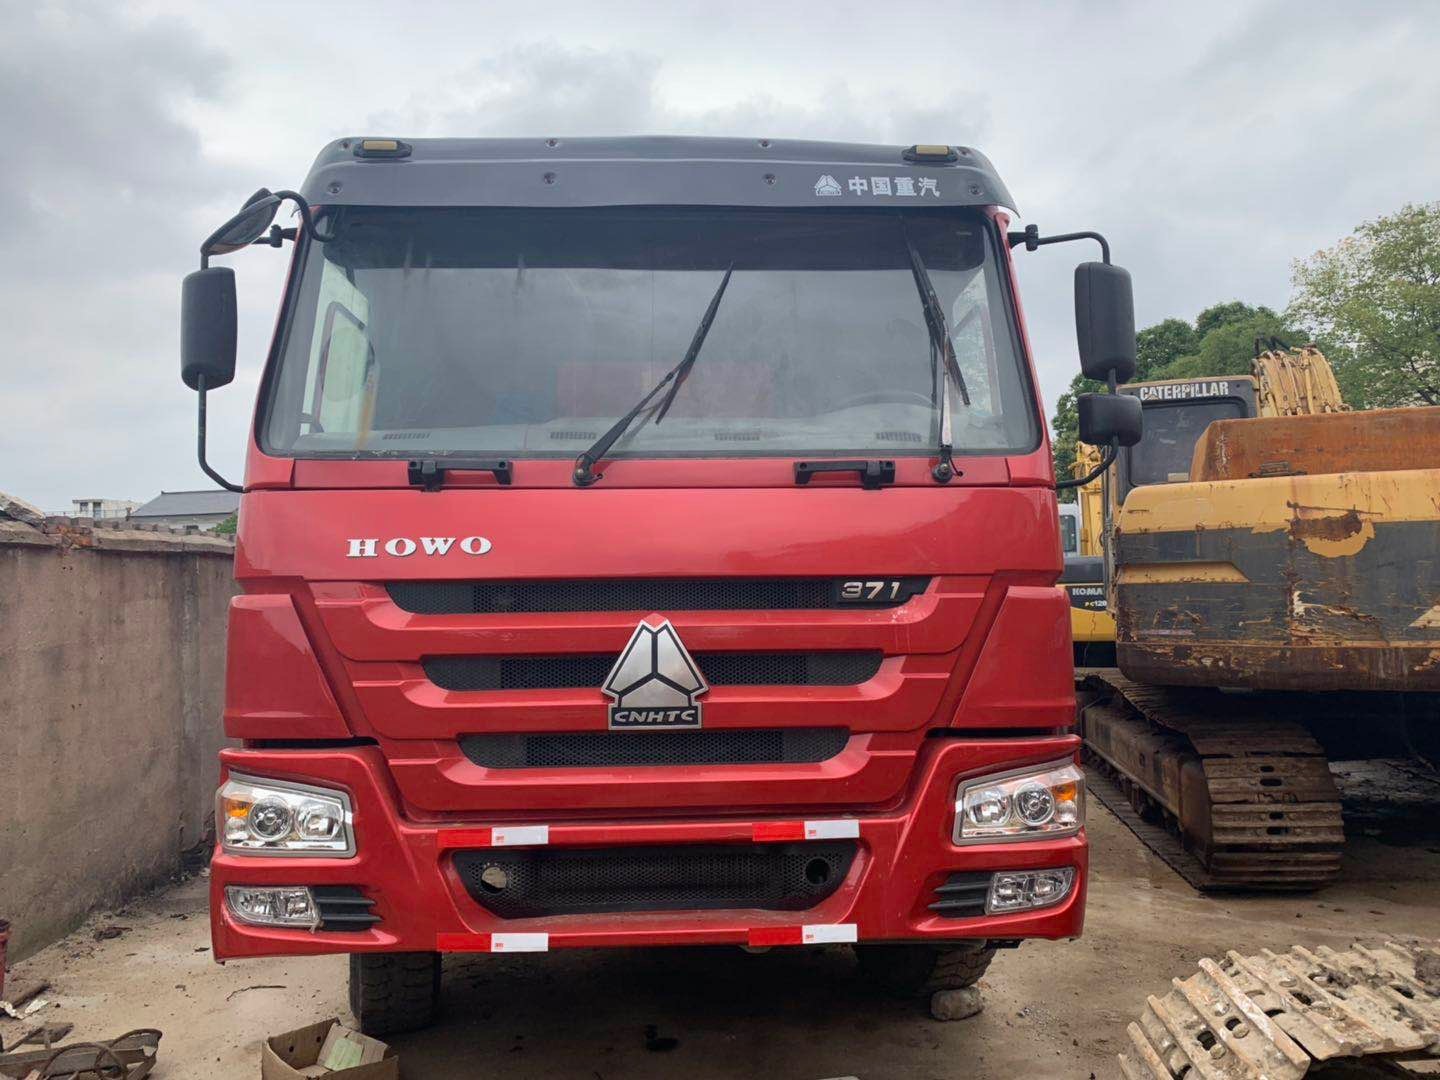 Used HOWO Dump Truck for Sale, Secondhand HOWO 371 Dump Truck with High Quality in Low Price